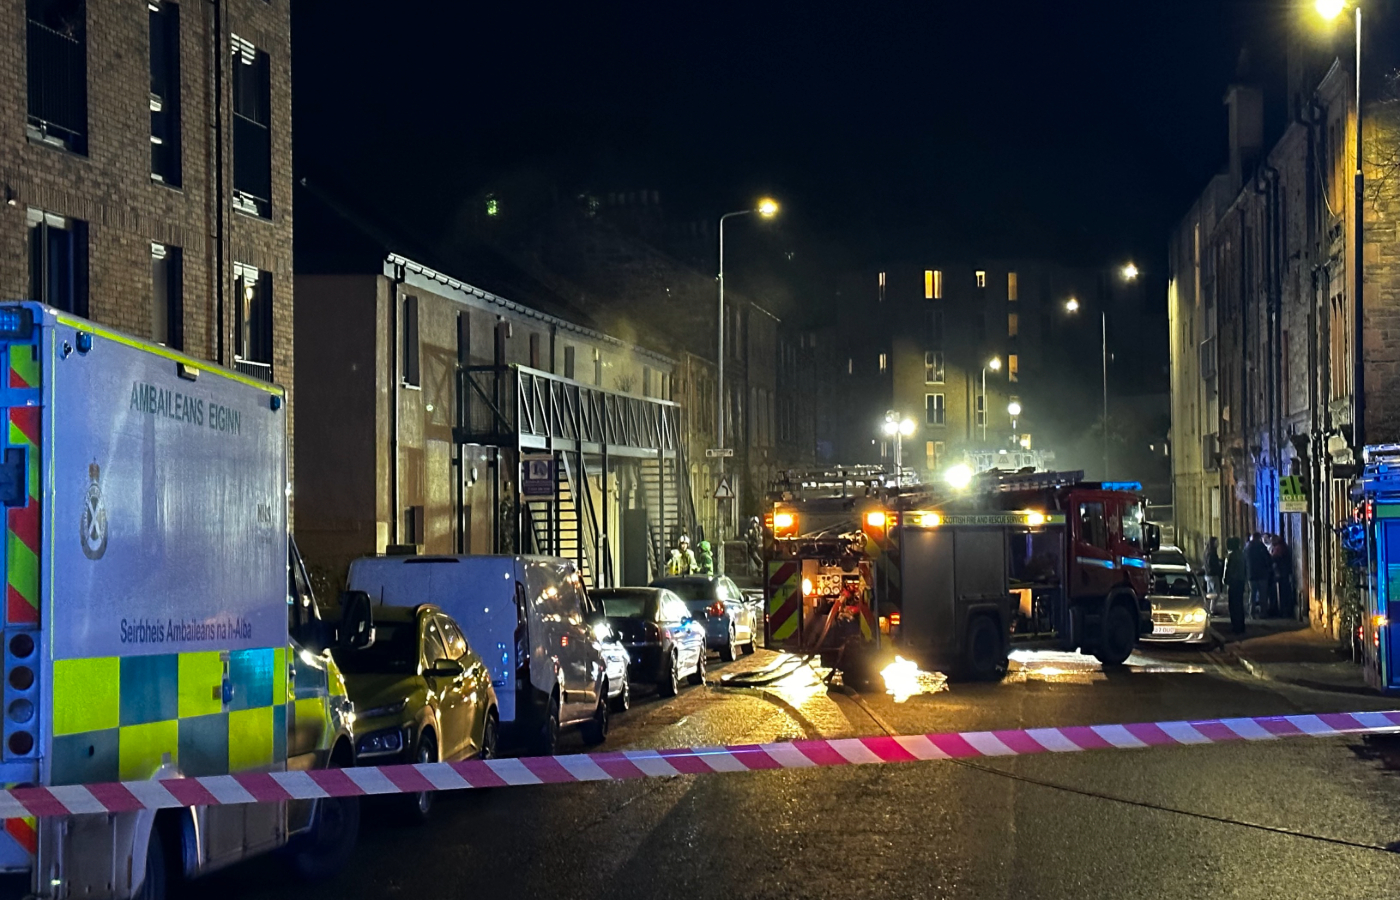 Emergency services responded with specialist equipment to the scene. Photo: STV News